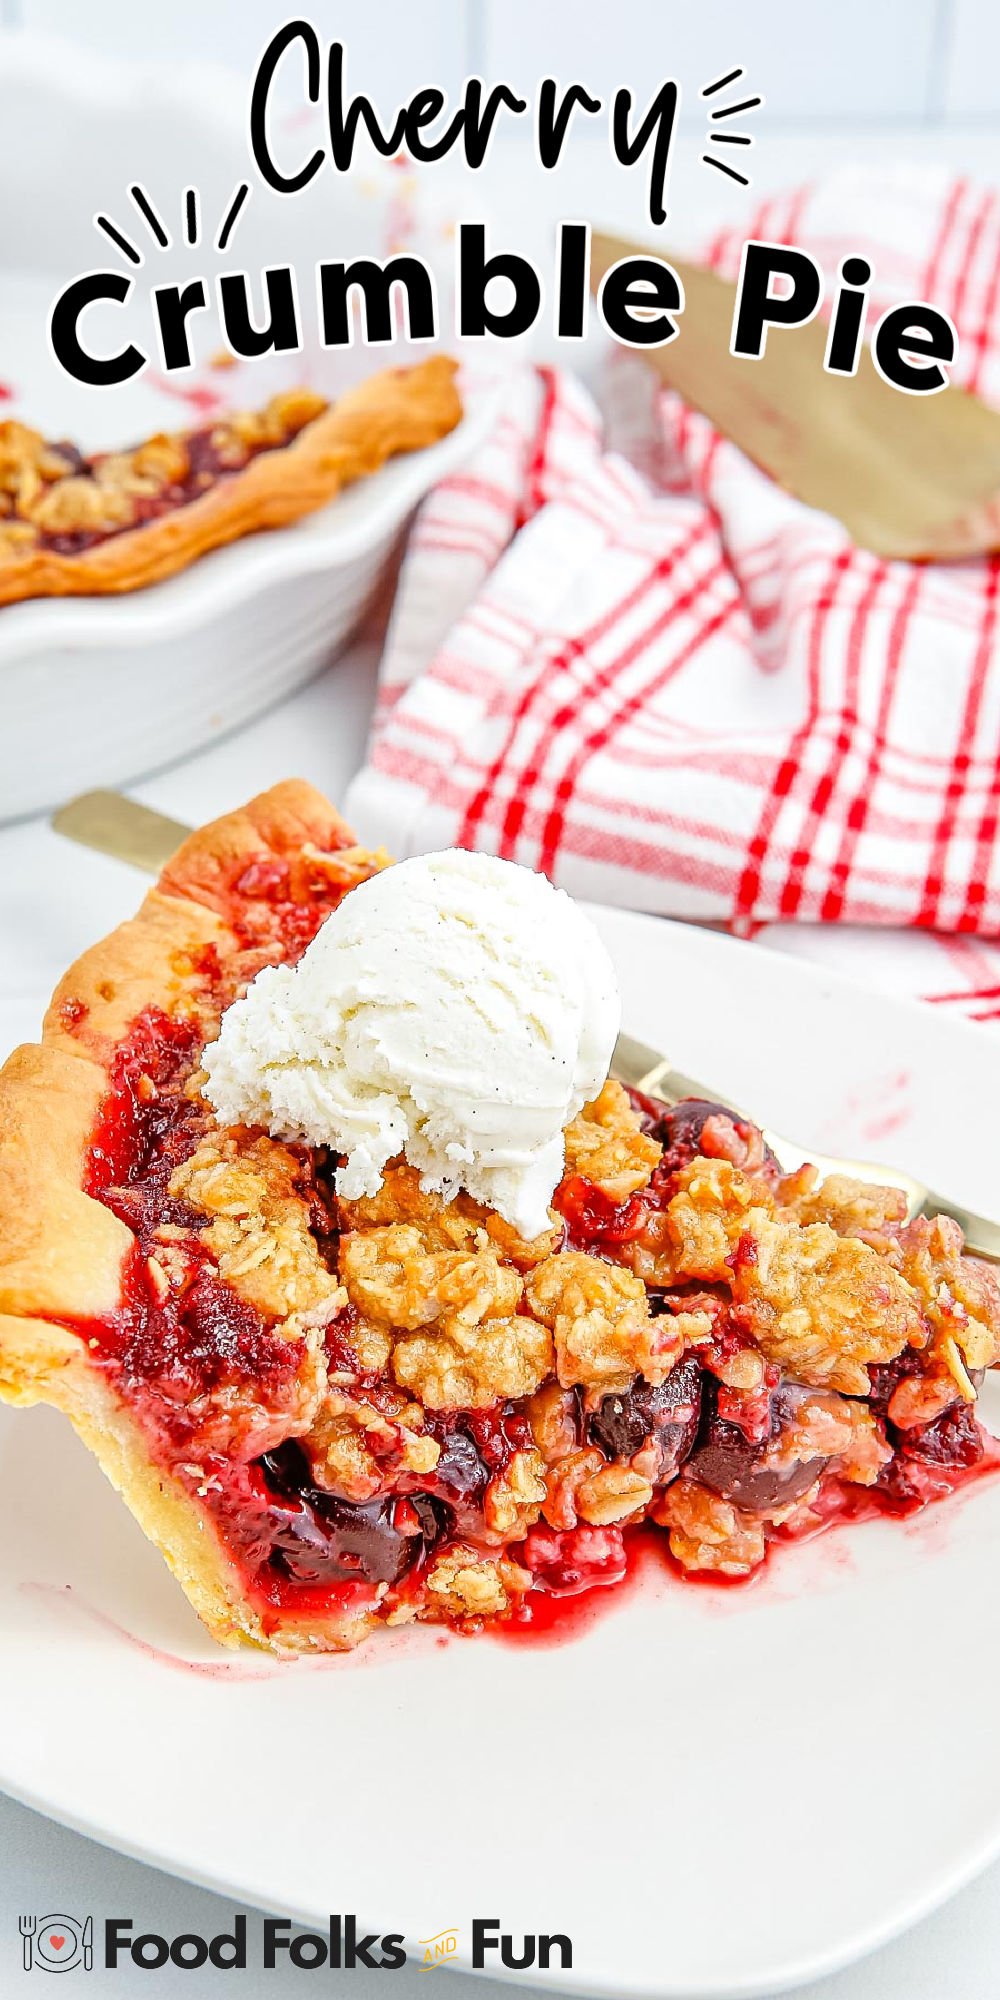 This Cherry Crumble Pie features summer's juiciest cherries covered in a crumble topping of oats, brown sugar, and cinnamon. via @foodfolksandfun